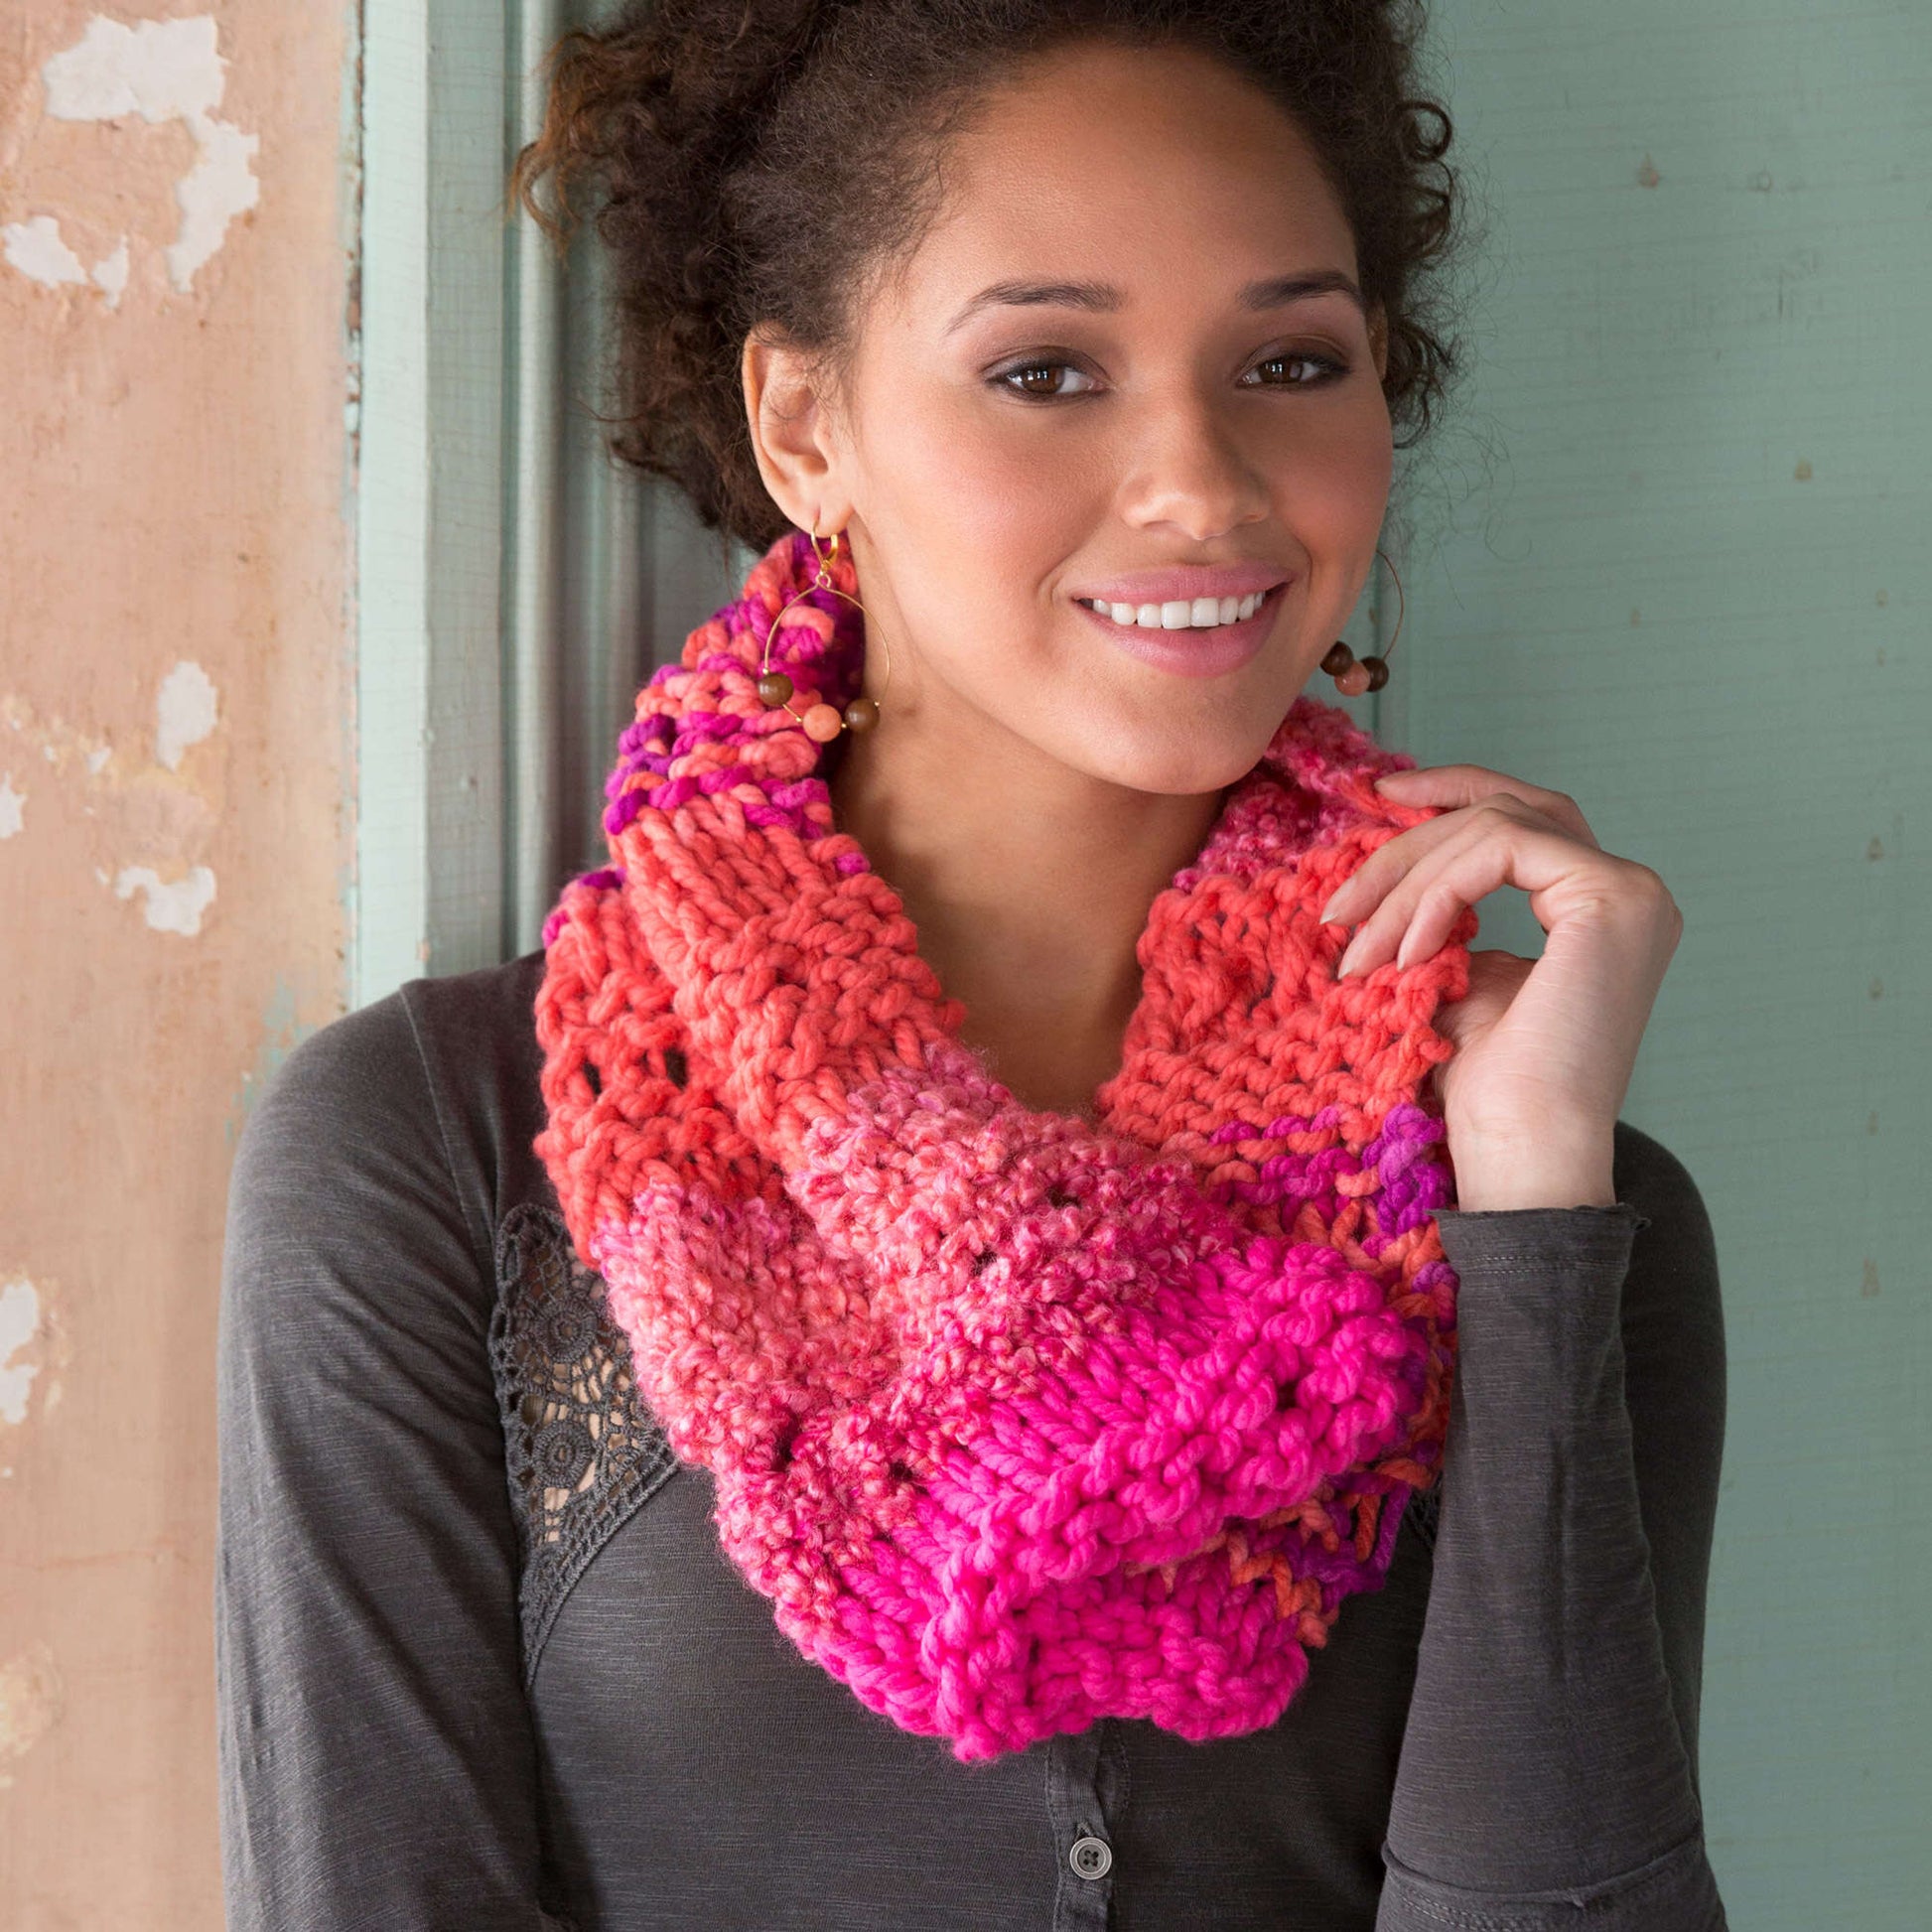 Free Red Heart Multi-Textured Cowl Knit Pattern